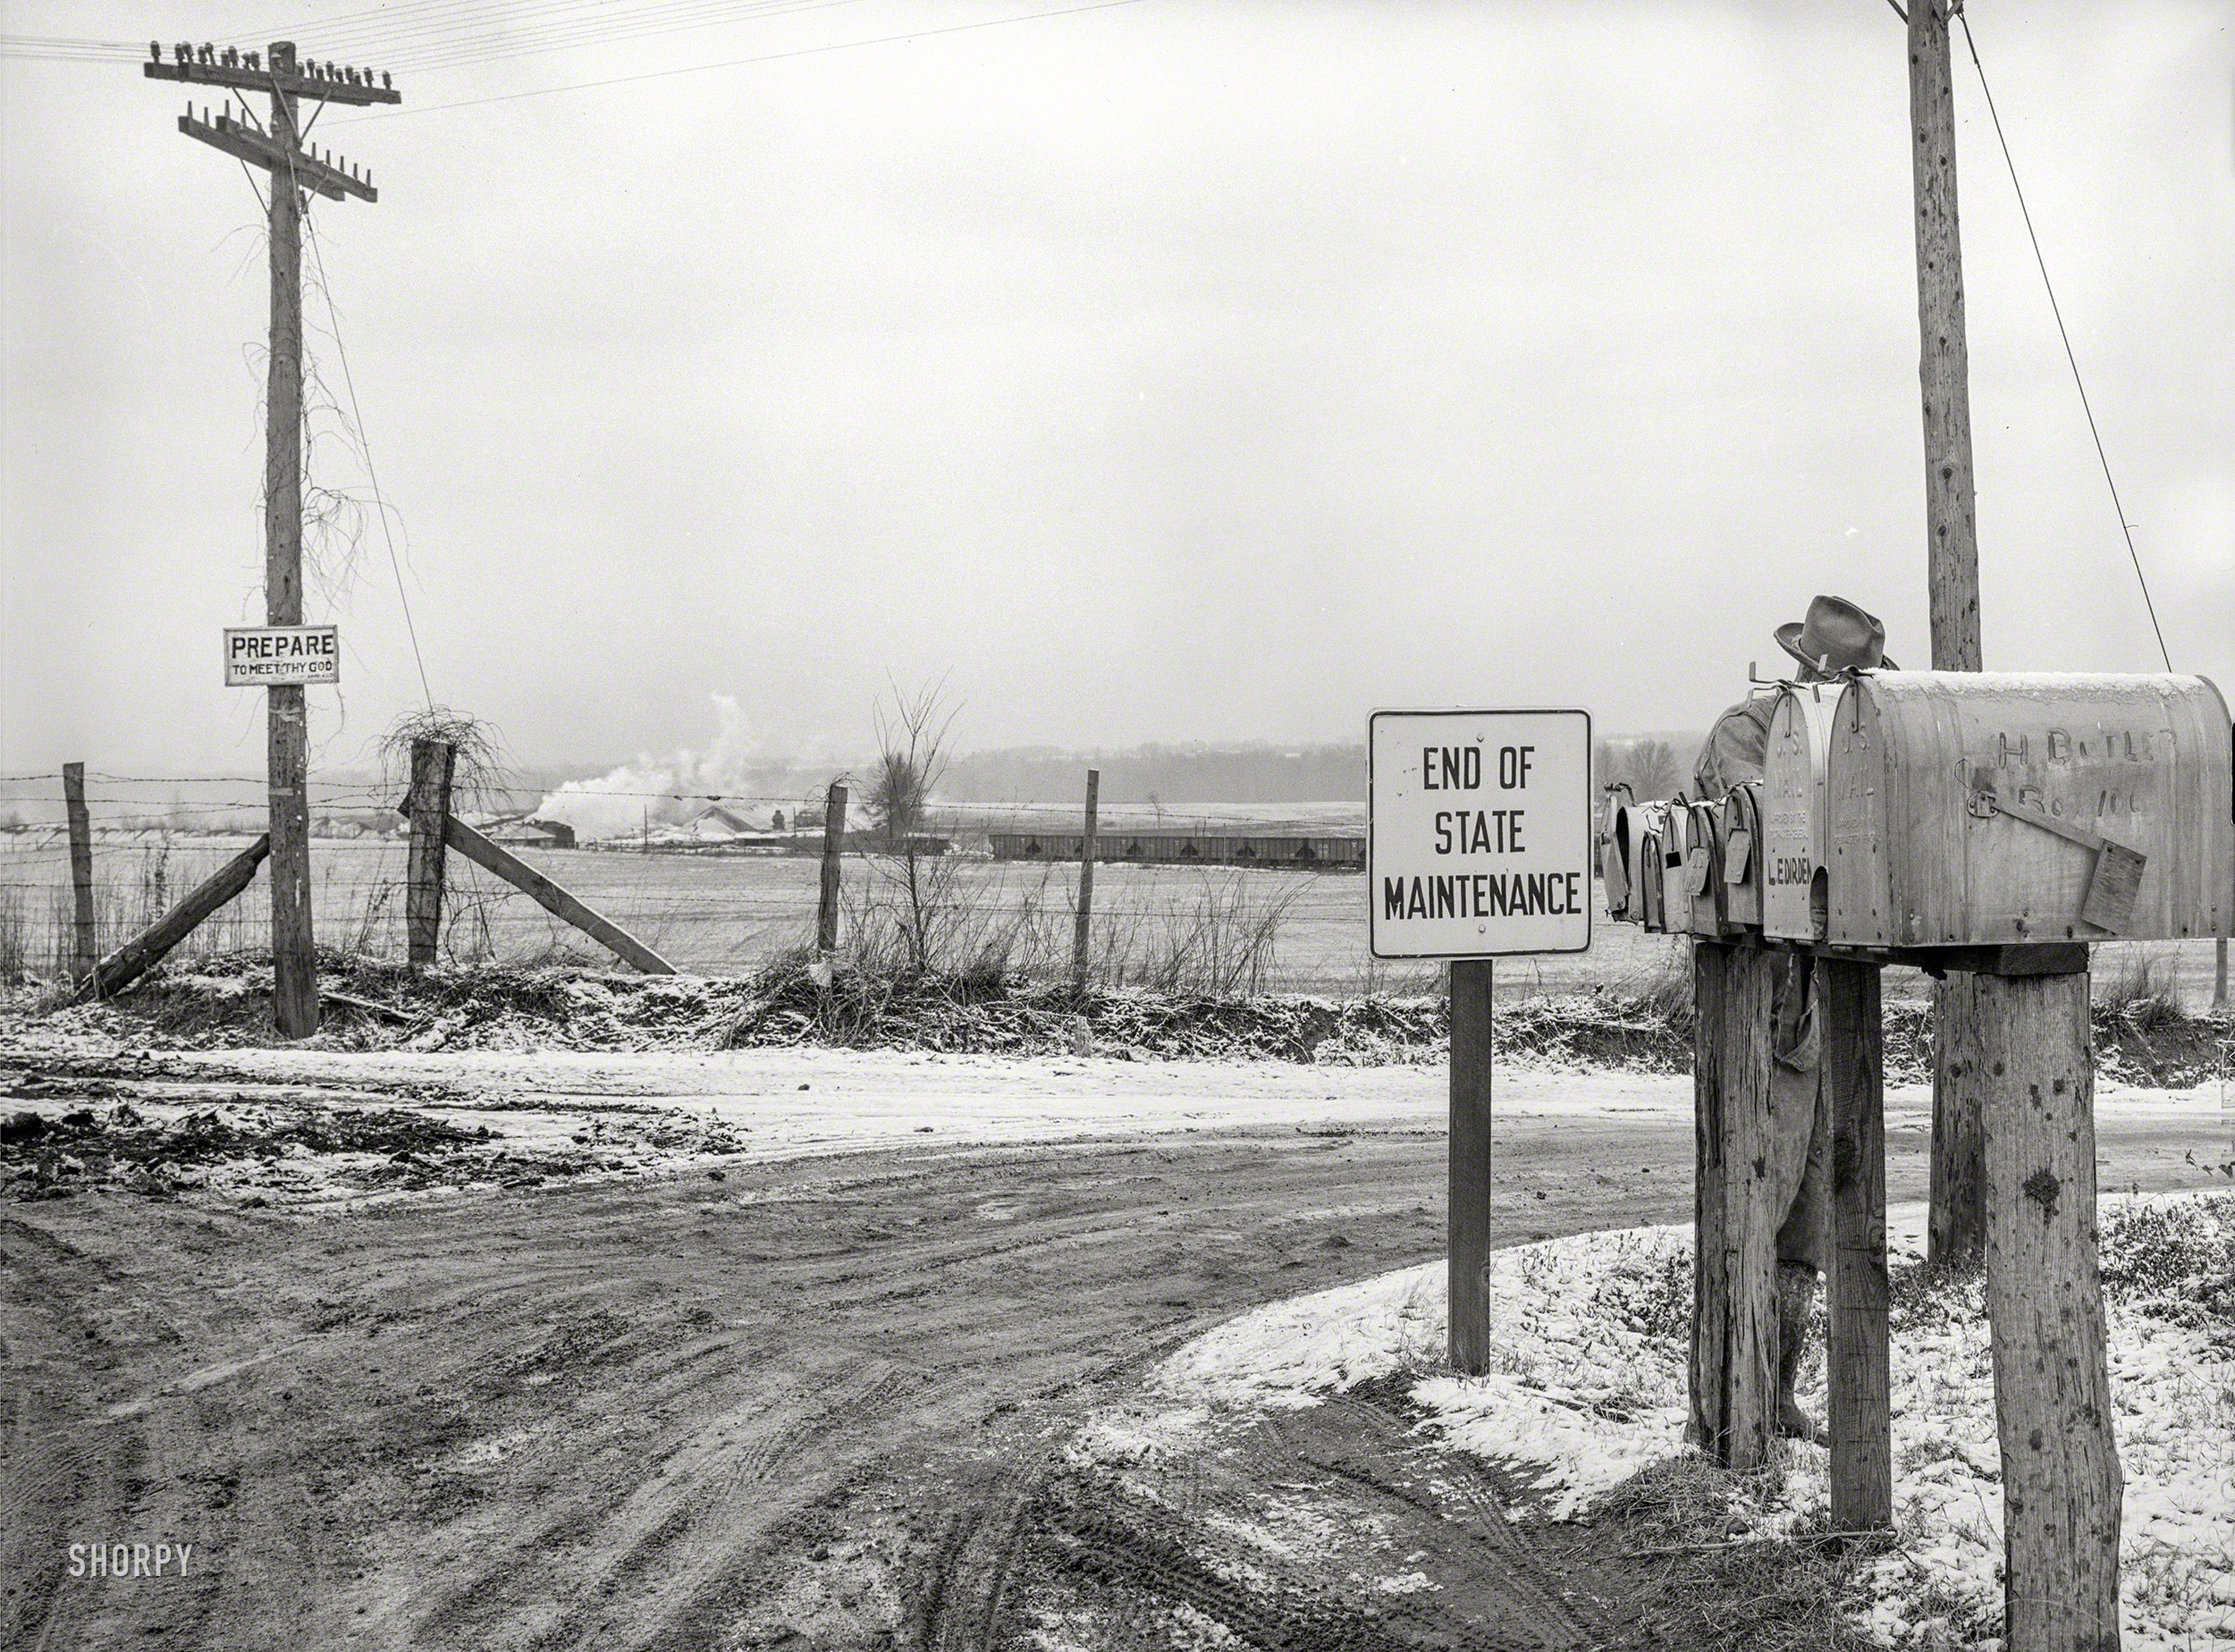 January 1939. "Highway in Franklin County, Illinois." Medium format negative by Arthur Rothstein for the Farm Security Administration. View full size.